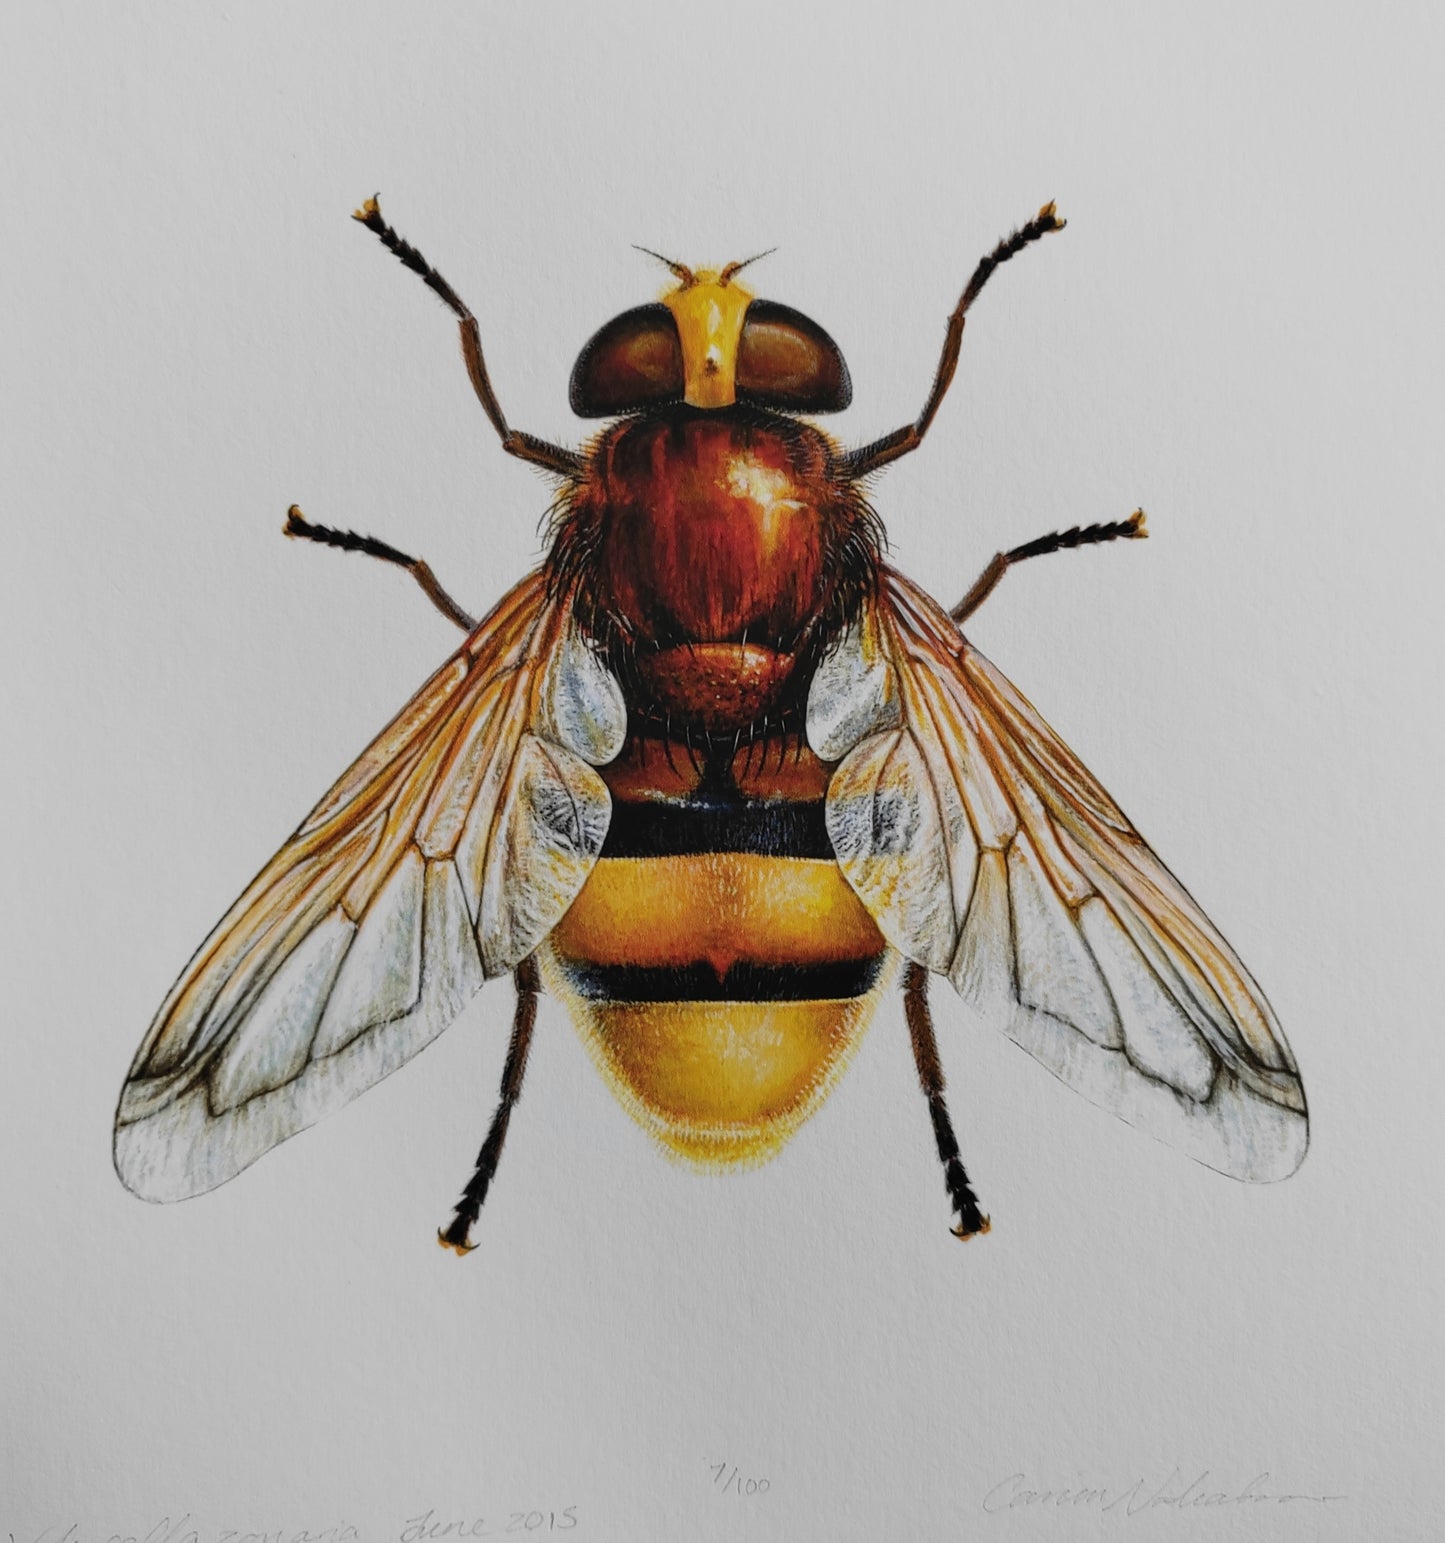 10x10" limited edition art print Volucella zonaria, Hornet mimic hoverfly